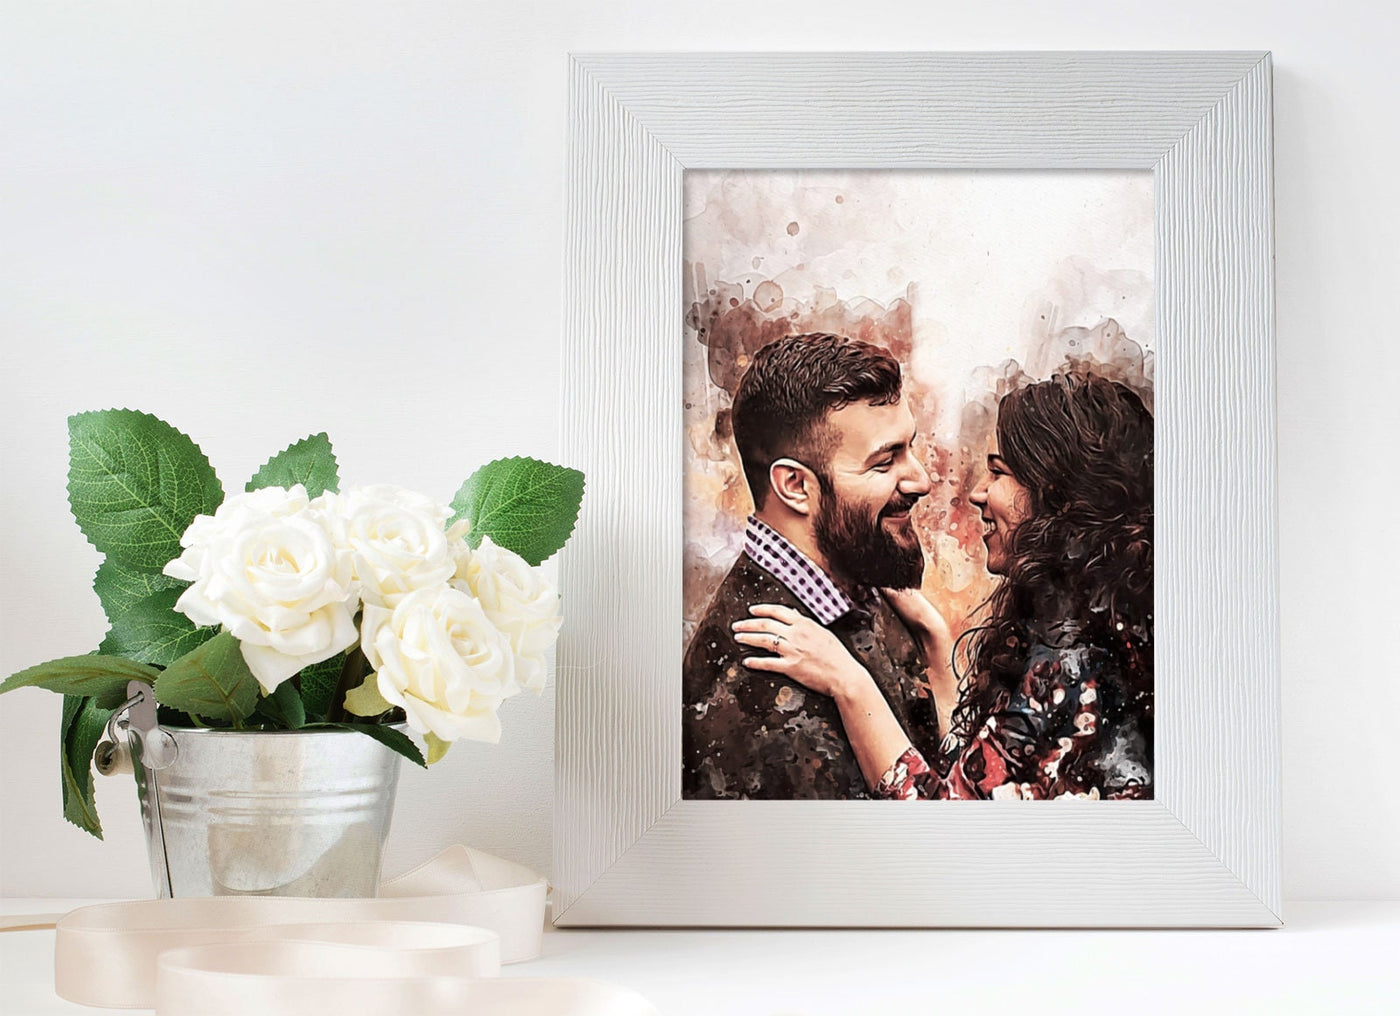 Custom Couple Photo to Painting | Watercolor Portrait | Personalized Anniversary Gift